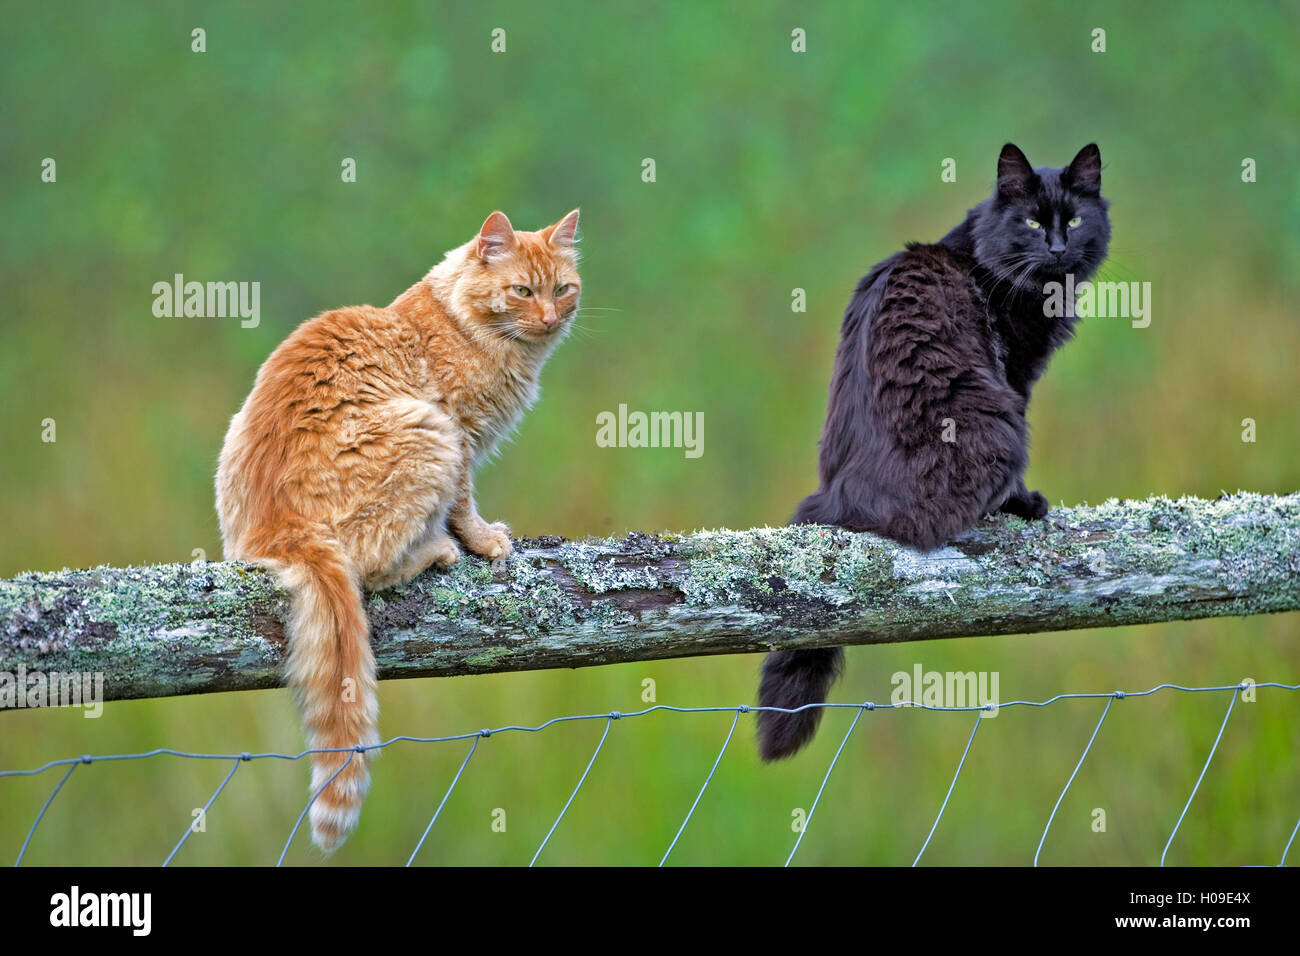 Cats ginger tabby and black and white together on fence Stock Photo